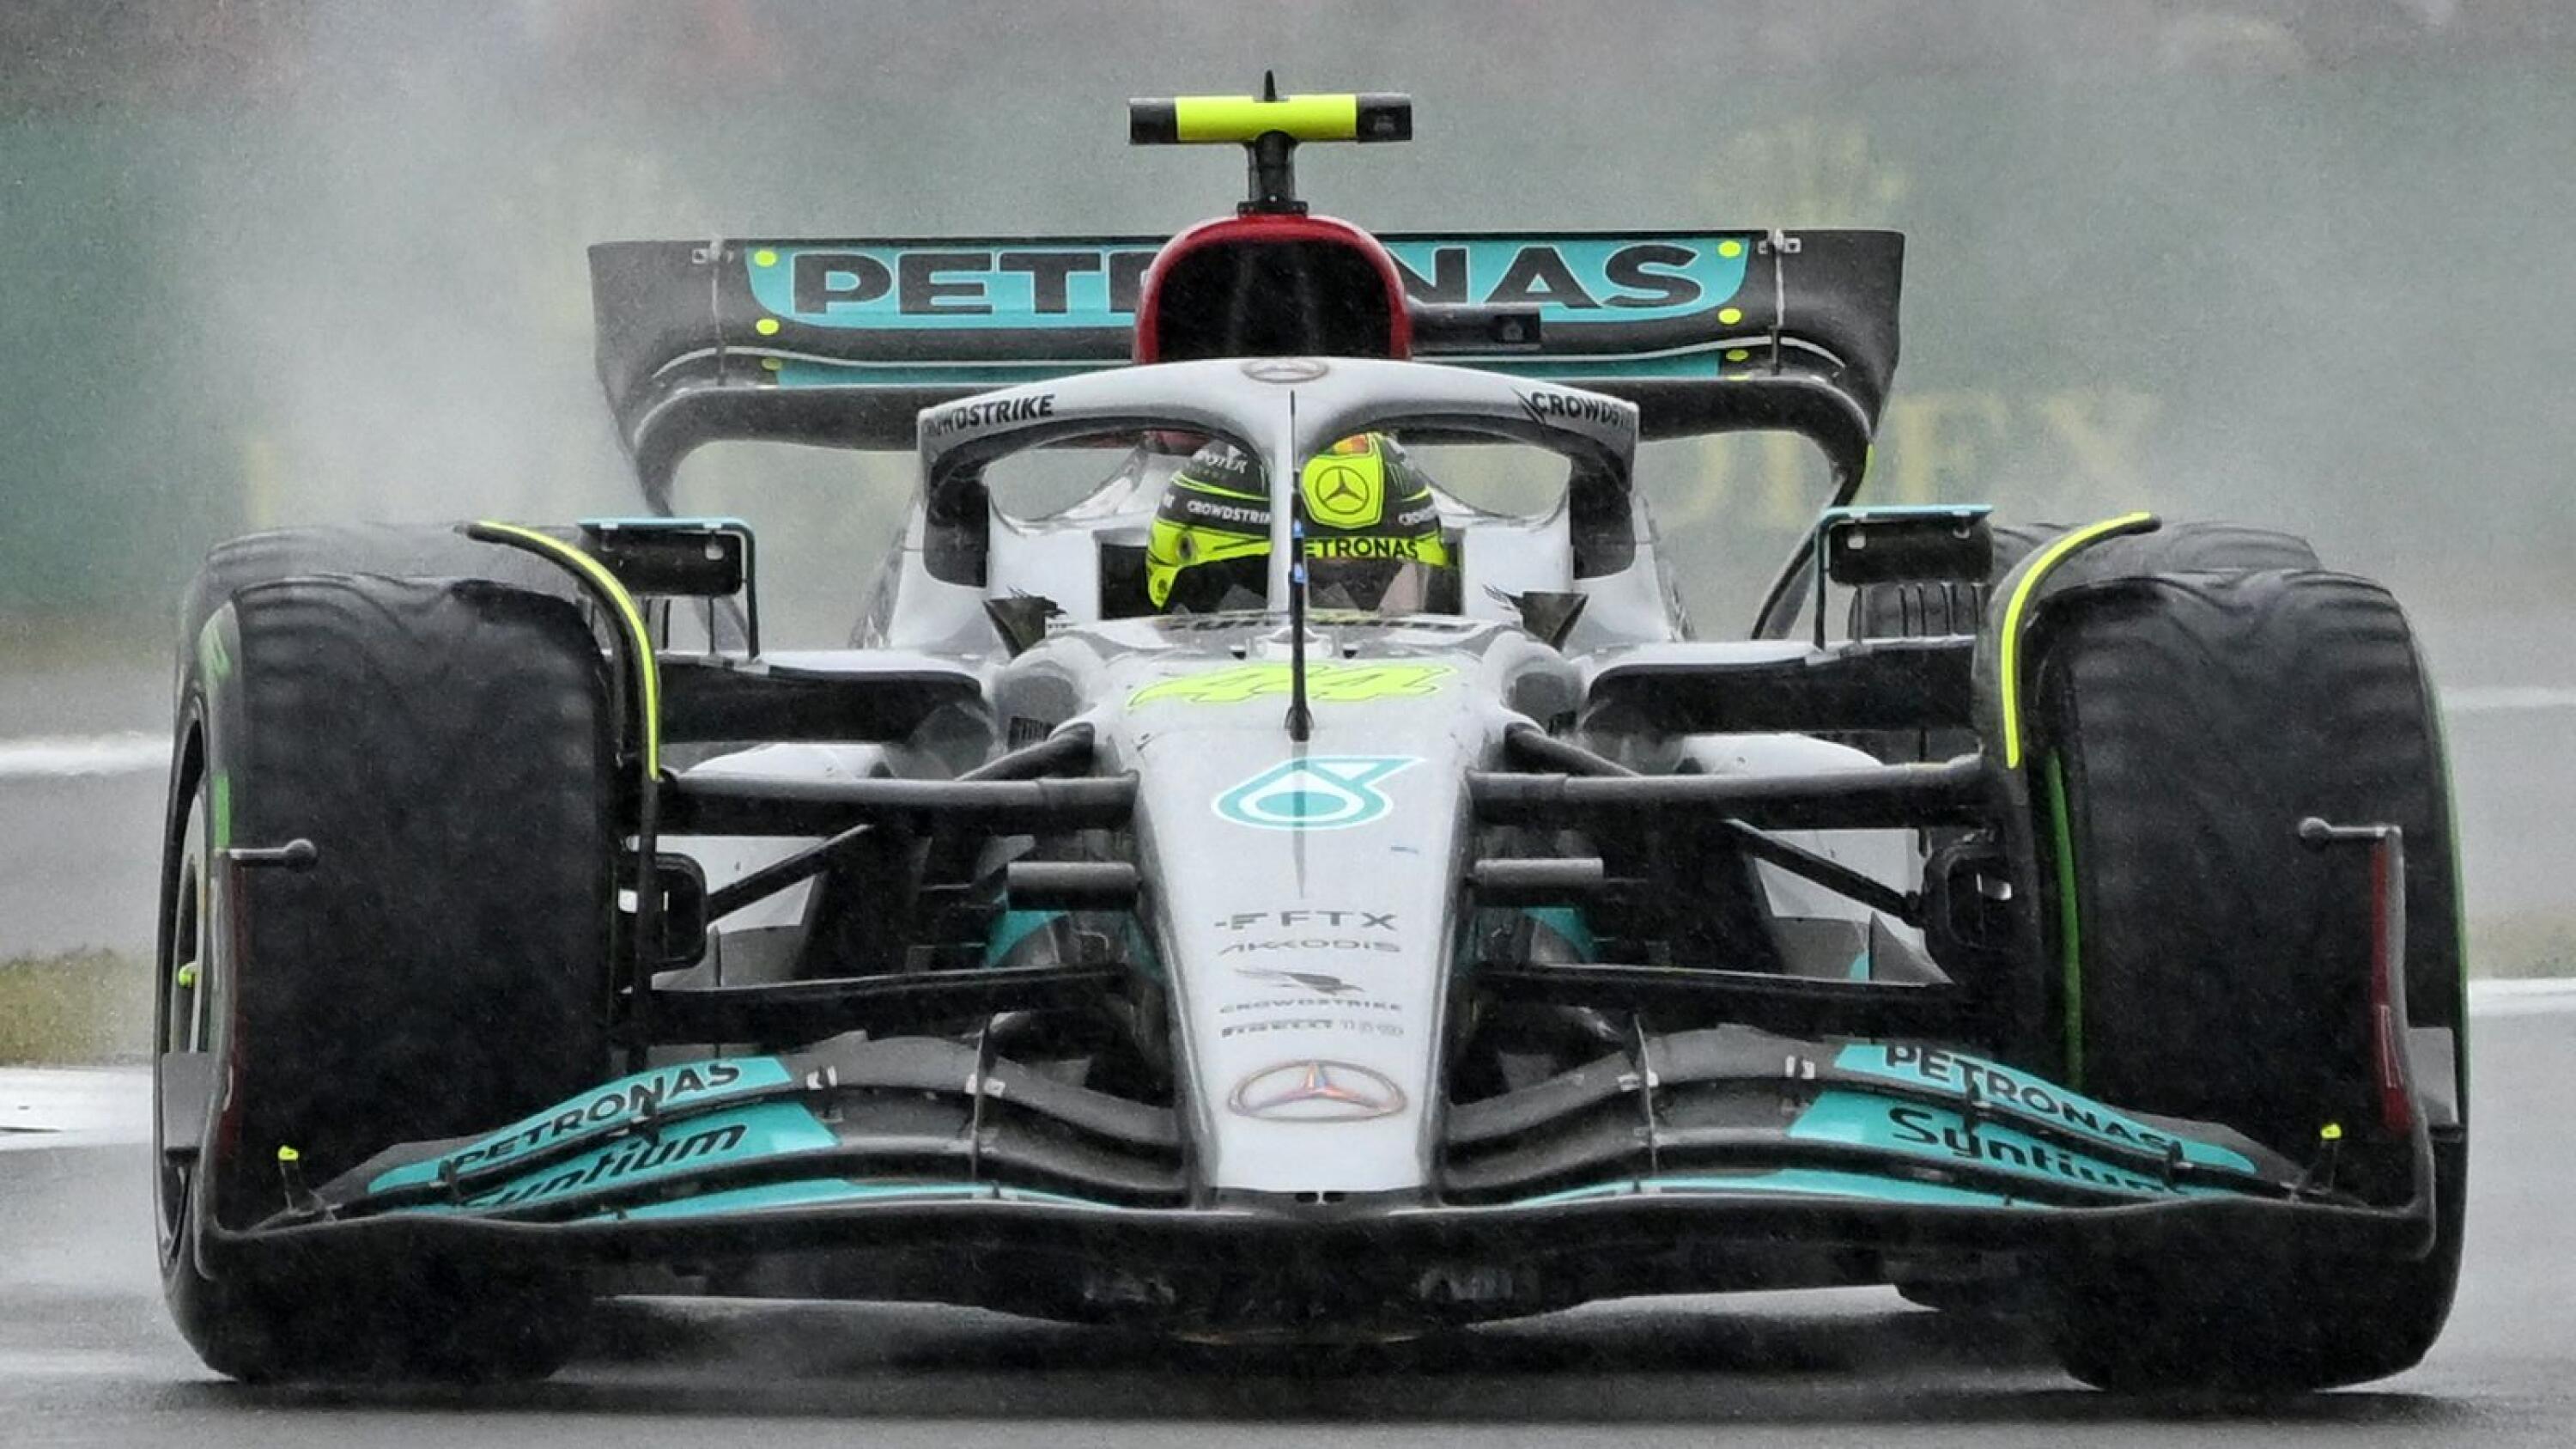 Mercedes' British driver Lewis Hamilton drives in rain during the second qualifying session for the Formula One British Grand Prix at the Silverstone motor racing circuit in Silverstone, central England on Saturday